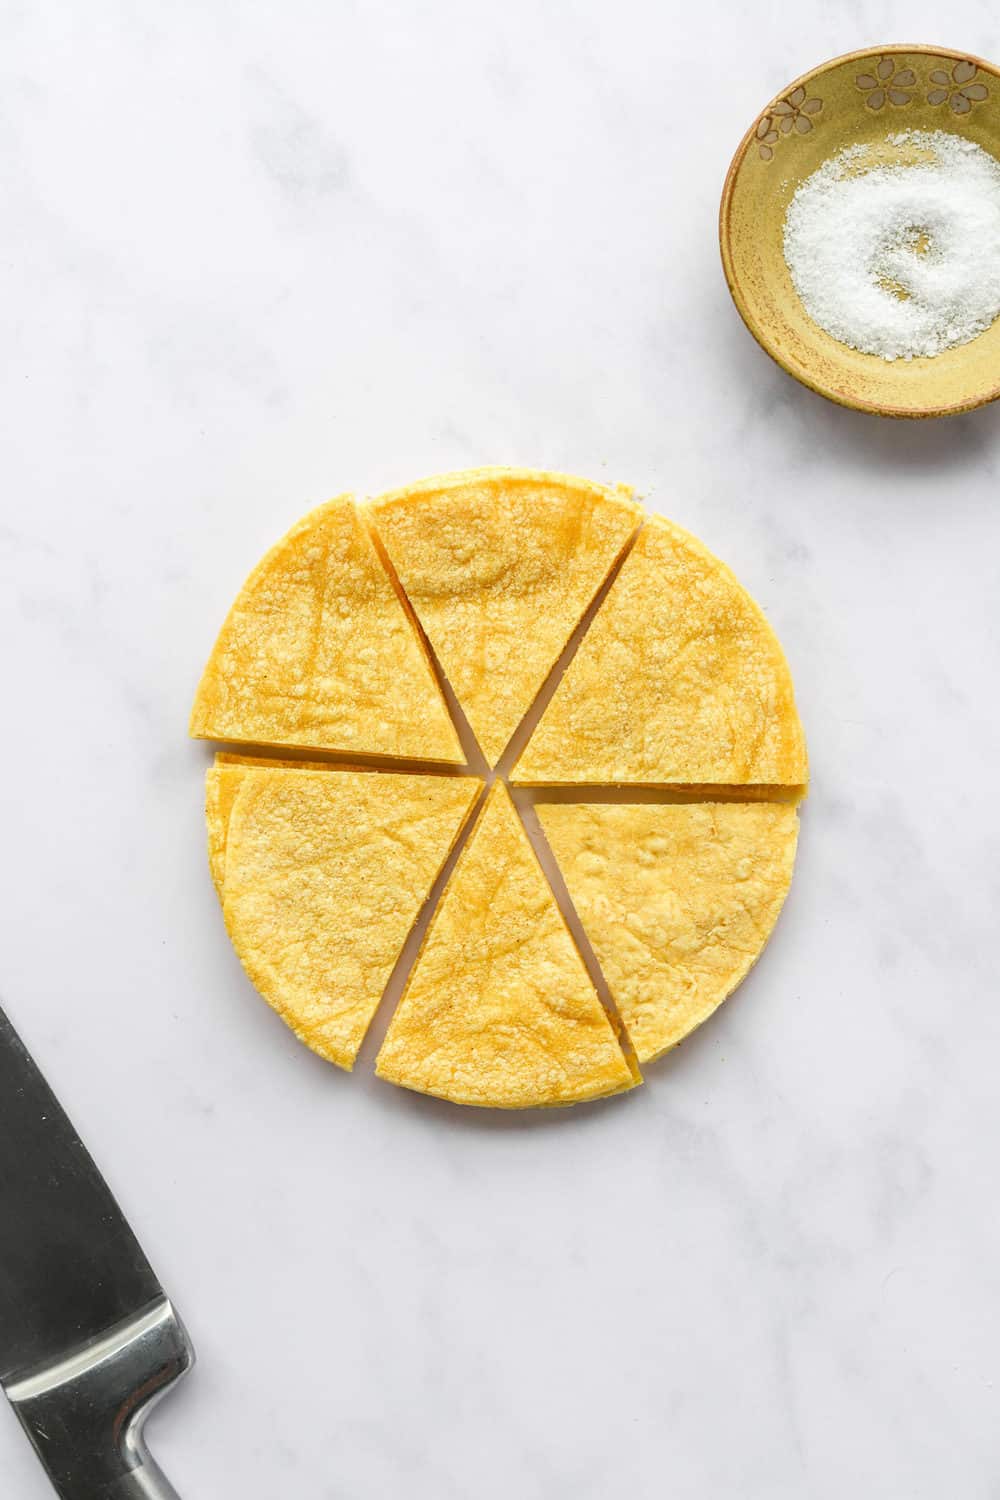 Stack of round yellow corn tortillas cut into 6 triangles with a knife next to the them and a yellow dish with salt in it behind them.